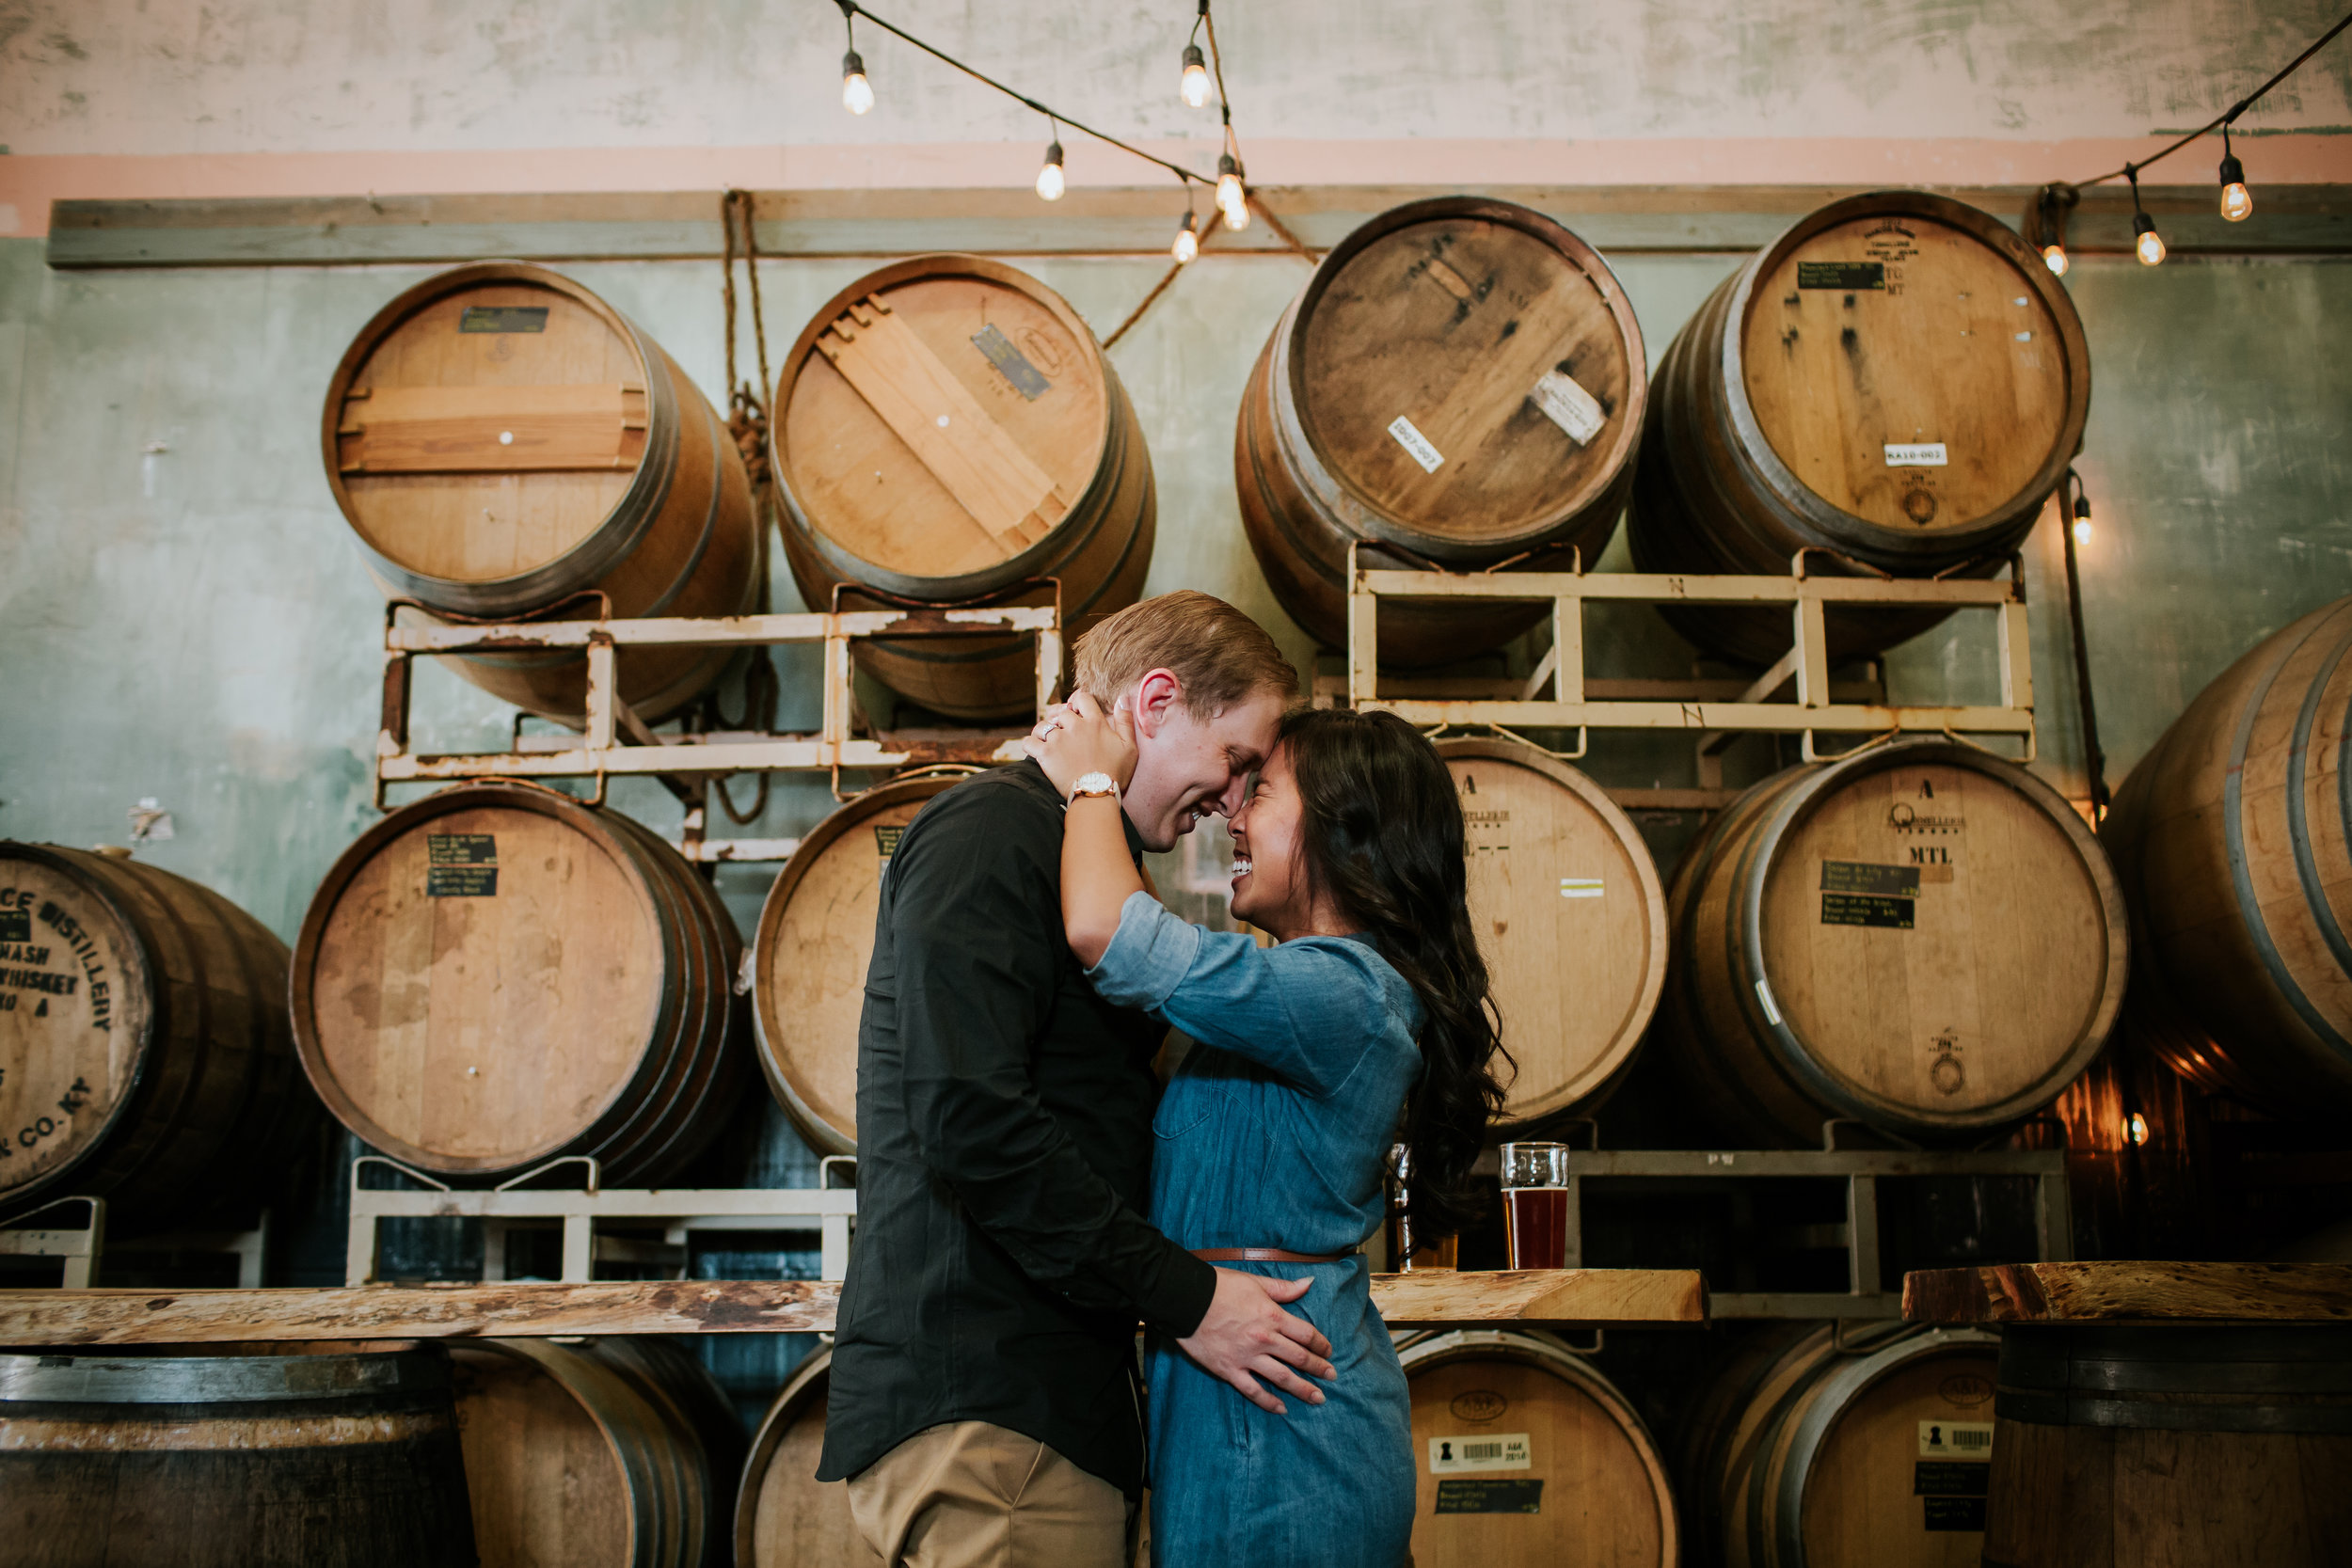 Penney and Chad San Francisco Engagament Session Brewery Mission Dolores_-11.jpg